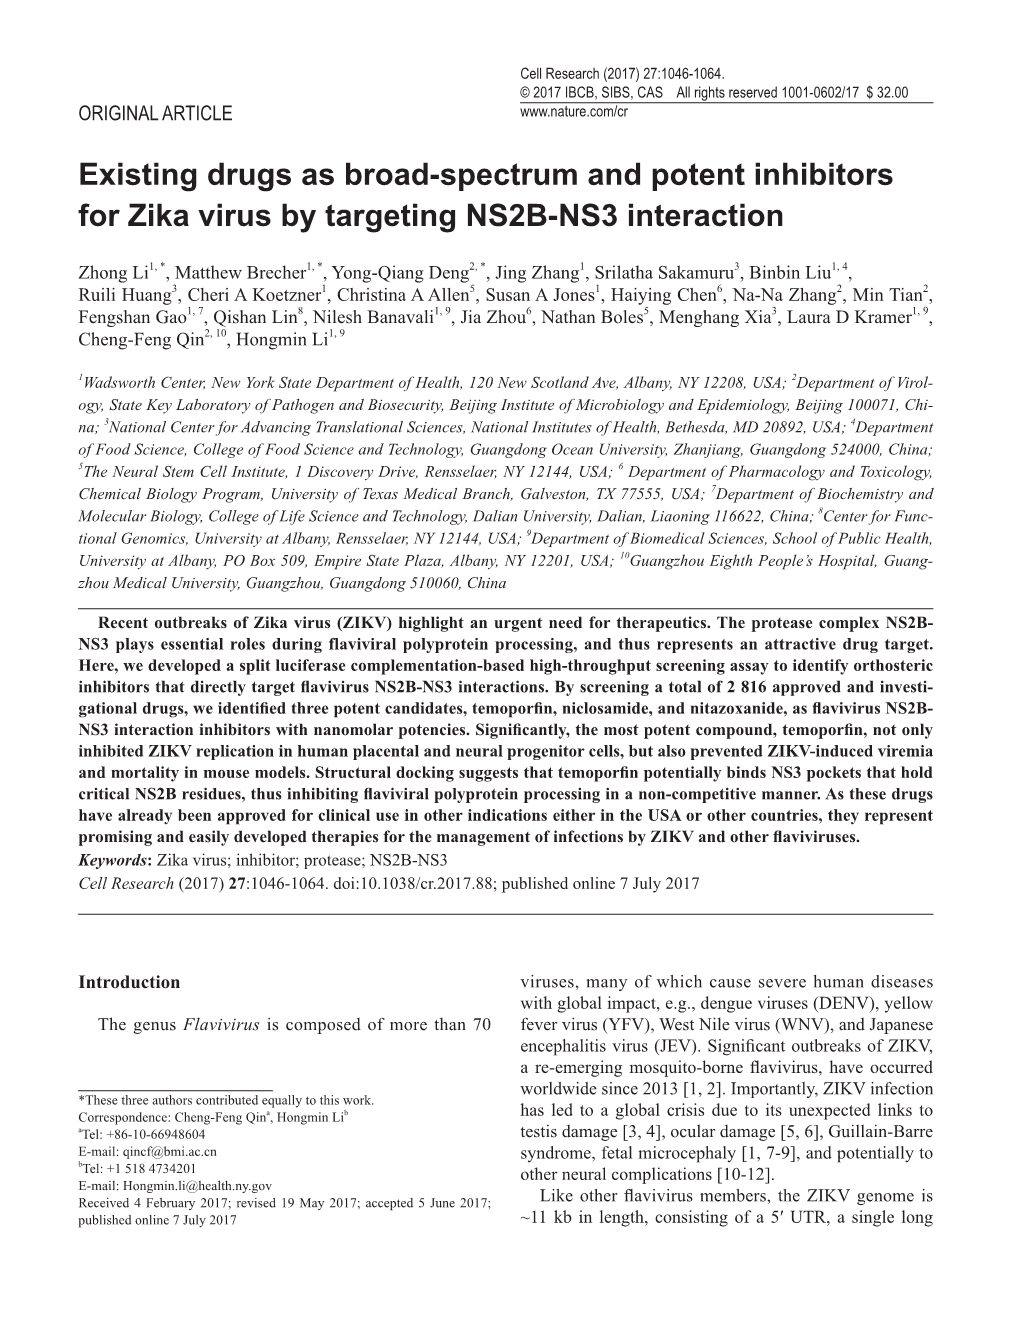 Existing Drugs As Broad-Spectrum and Potent Inhibitors for Zika Virus by Targeting NS2B-NS3 Interaction